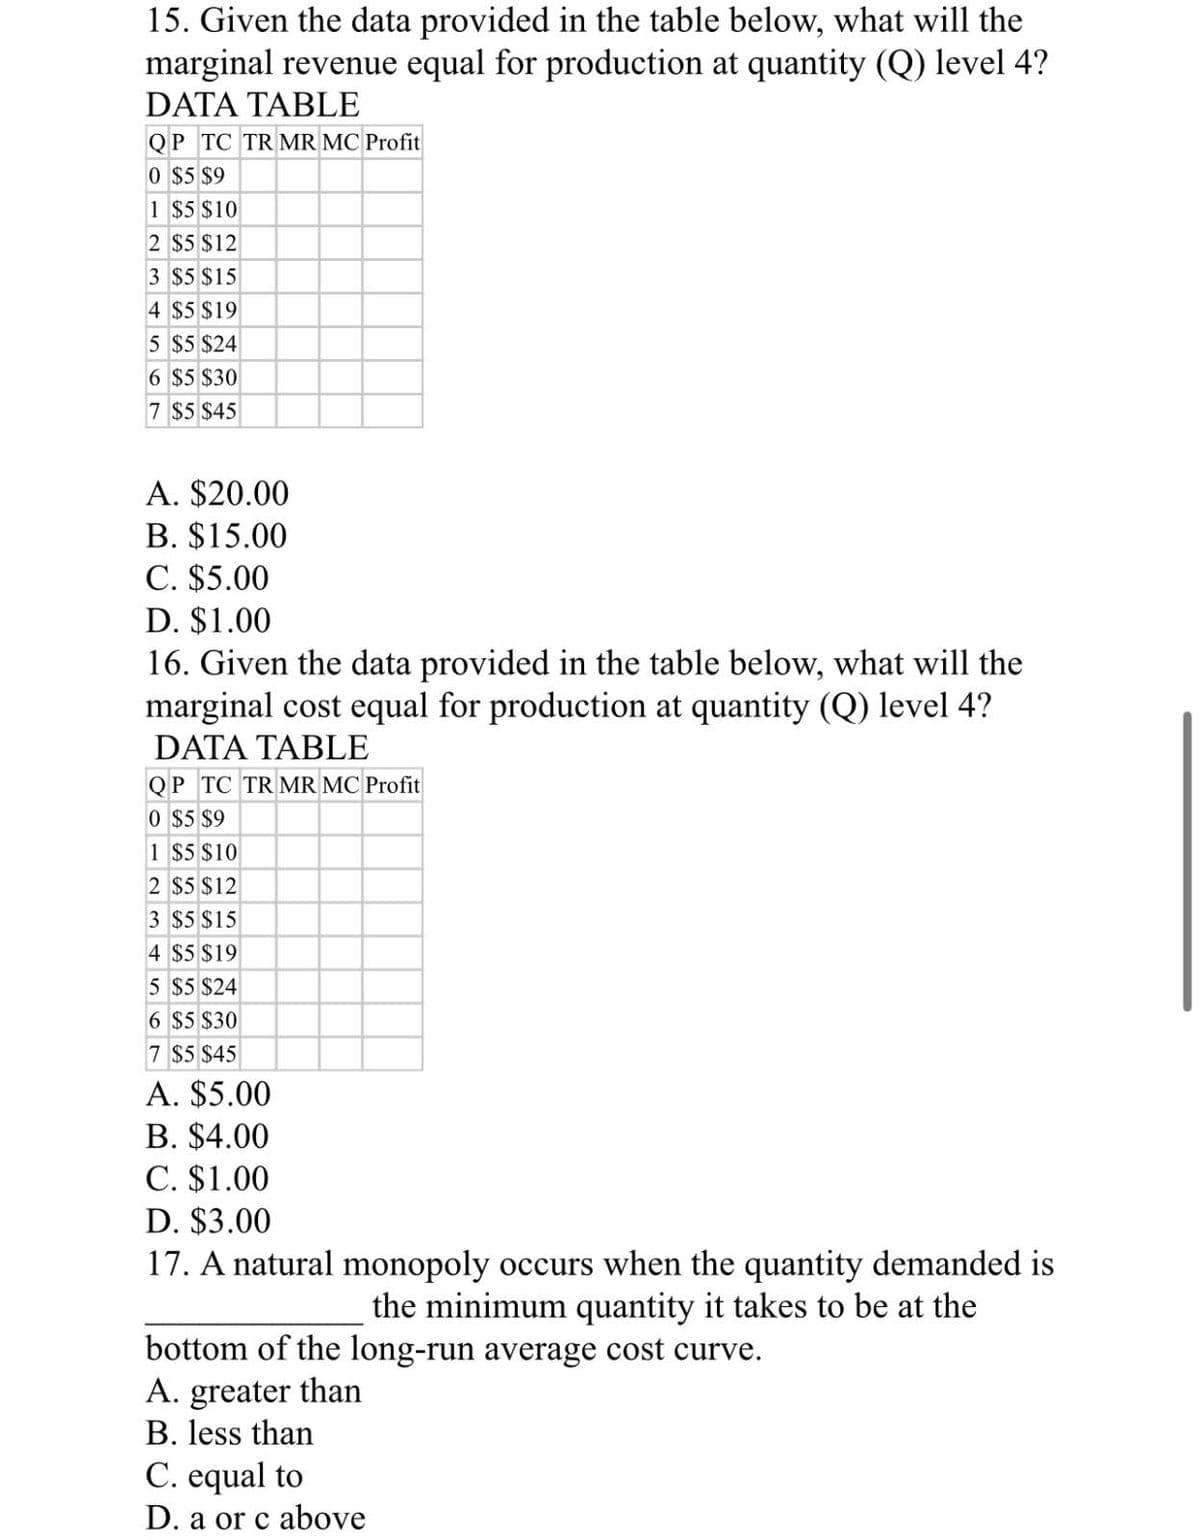 15. Given the data provided in the table below, what will the
marginal revenue equal for production at quantity (Q) level 4?
DATA TABLE
QP TC TR MR MC Profit
0 $5 $9
1 $5 $10
2 $5 $12
3 $5 $15
4 $5 $19
5 $5 $24
6 $5 $30
7 $5 $45
A. $20.00
B. $15.00
C. $5.00
D. $1.00
16. Given the data provided in the table below, what will the
marginal cost equal for production at quantity (Q) level 4?
DATA TABLE
QP TC TR MR MC Profit
0 $5 $9
1 $5 $10
2 $5 $12
3 $5 $15
4 $5 $19
5 $5 $24
6 $5 $30
7 $5 $45
A. $5.00
B. $4.00
C. $1.00
D. $3.00
17. A natural monopoly occurs when the quantity demanded is
the minimum quantity it takes to be at the
bottom of the long-run average cost curve.
A. greater than
B. less than
C. equal to
D. a or c above